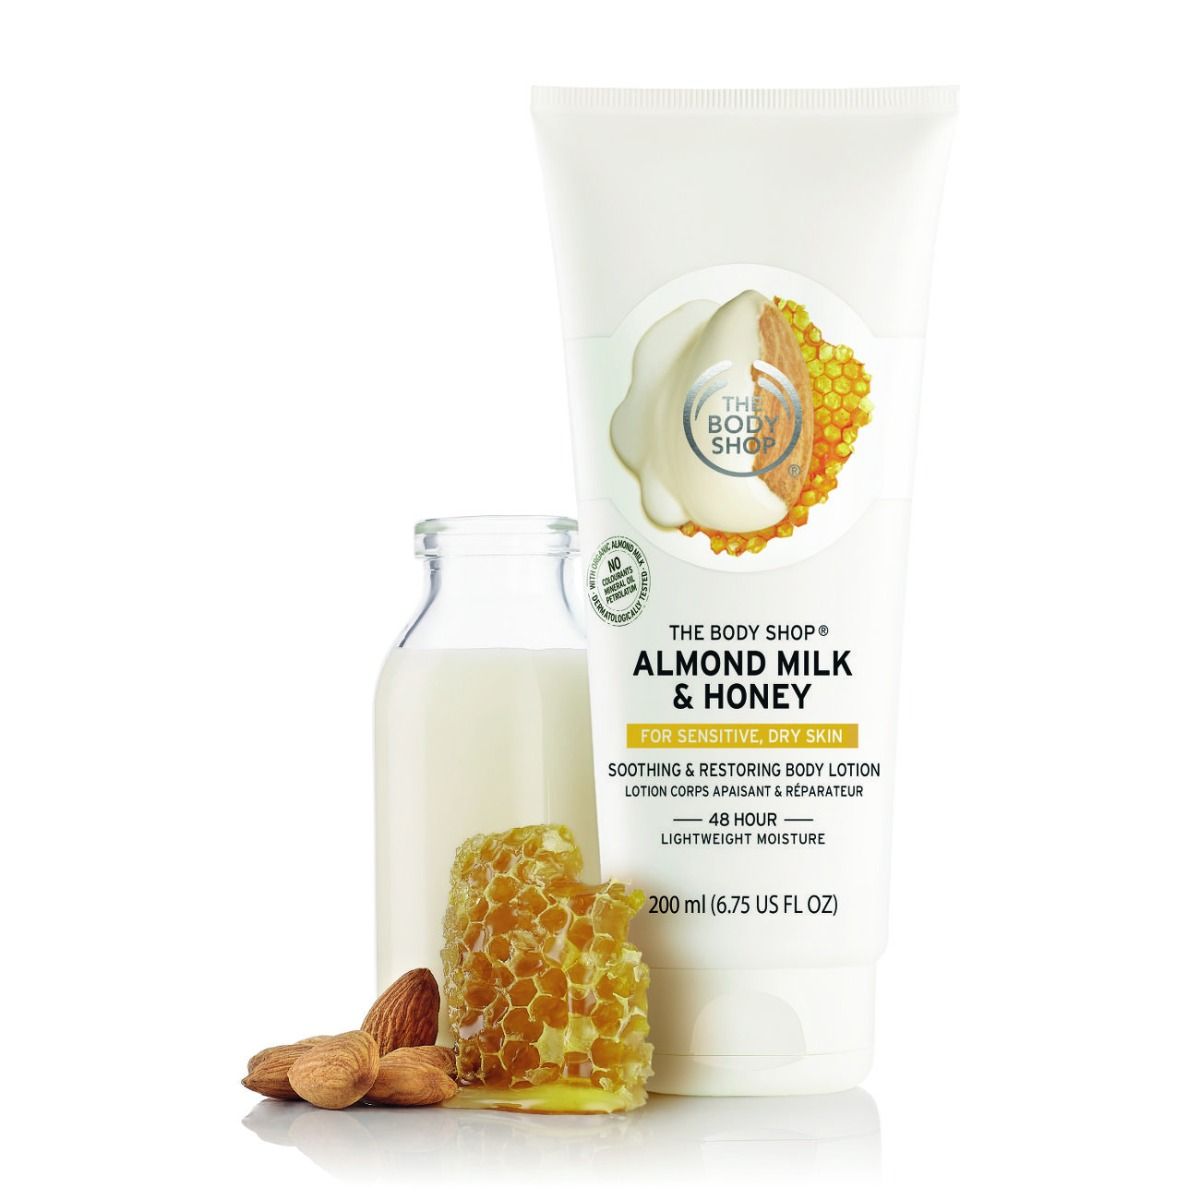 The Body Shop Almond Milk & Honey Soothing & Restoring Body Lotion (200 ml) The Body Shop